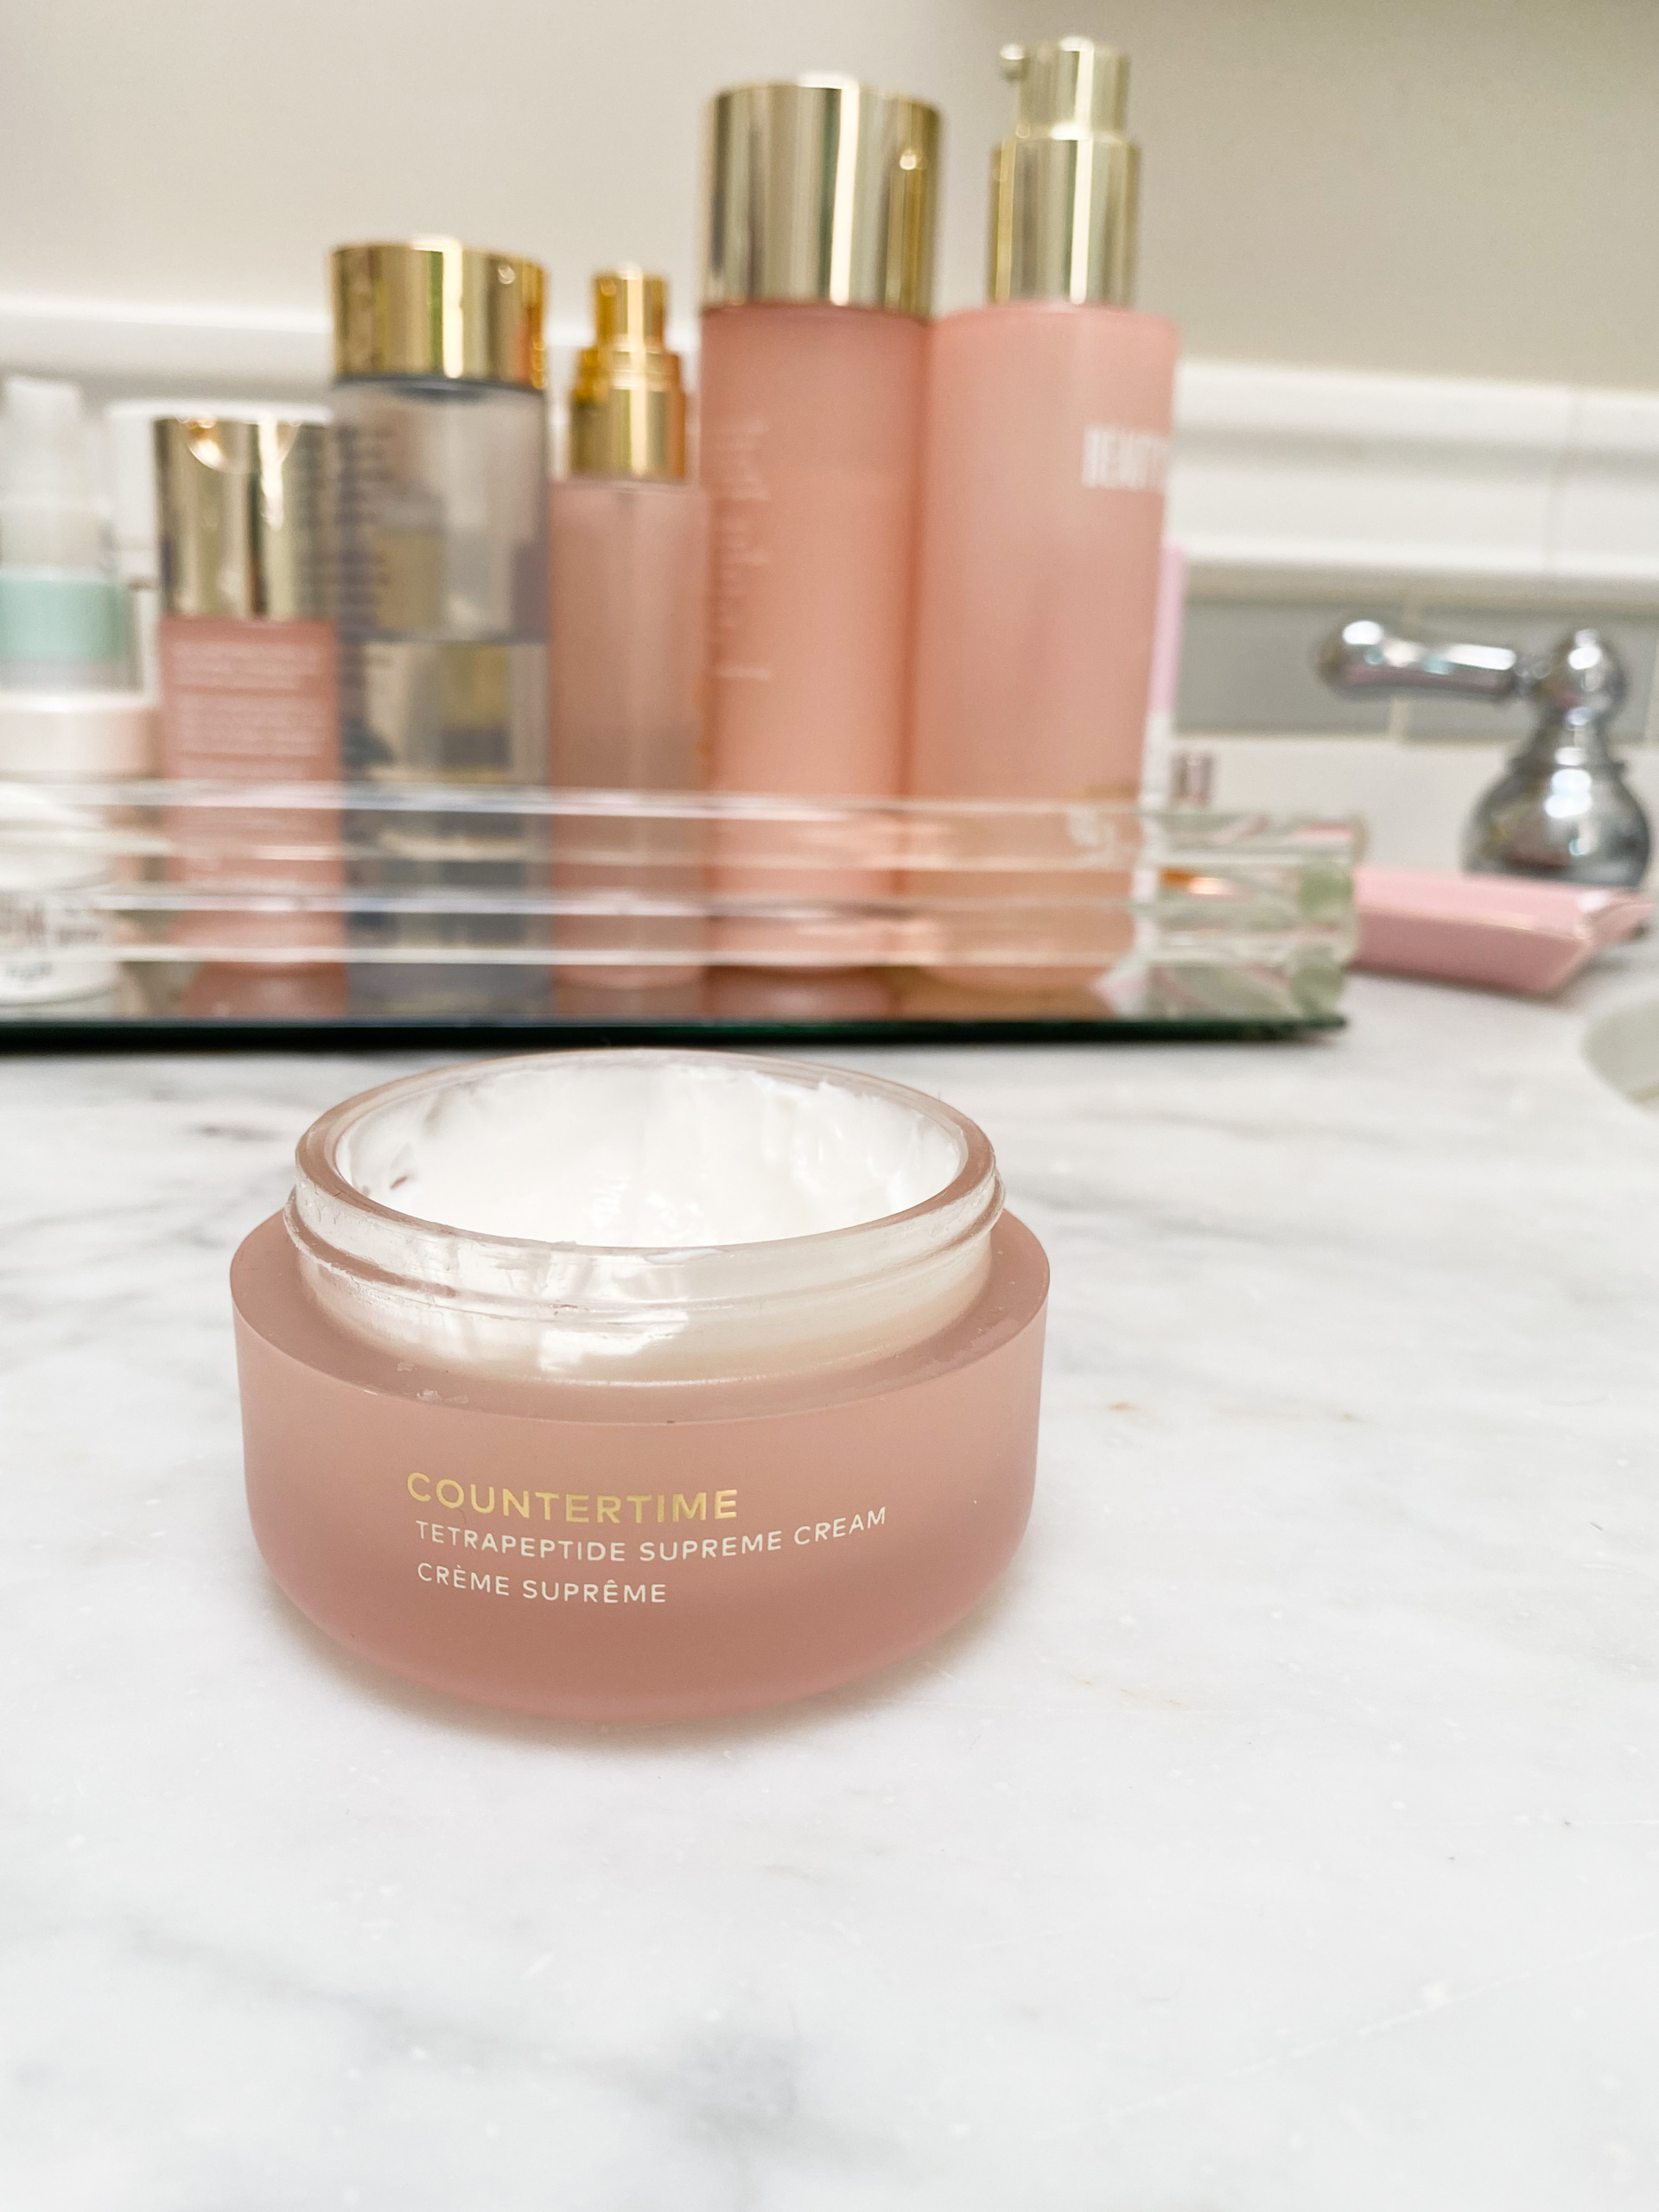 Countertime night cream review, anti-aging night cream review, Sephora clean beauty